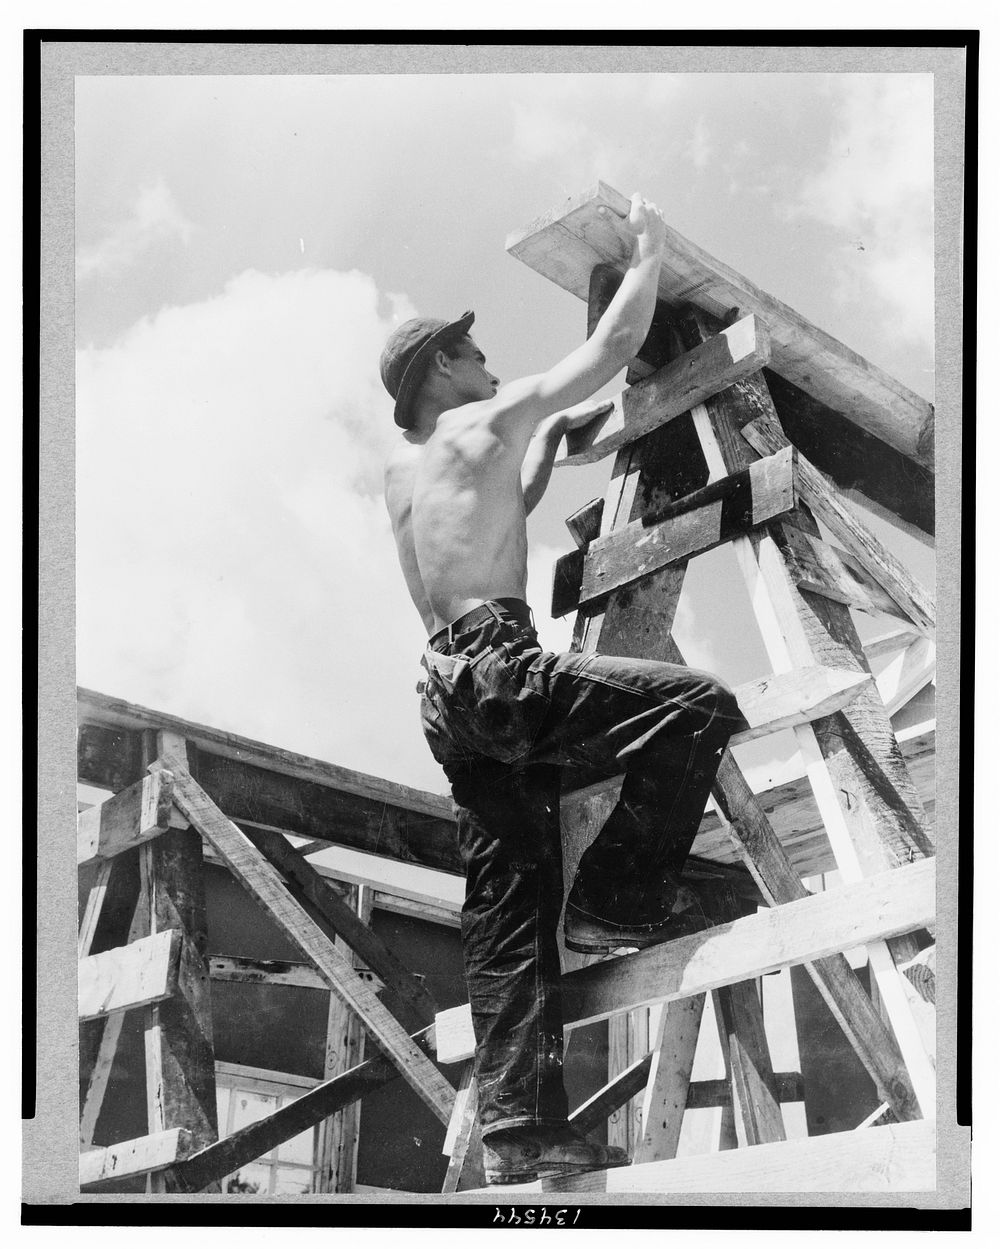 Work projects: Enrollee William L. Cross, Appalachia, Va., climbing up on scaffold erected for assembling a prefabricated…